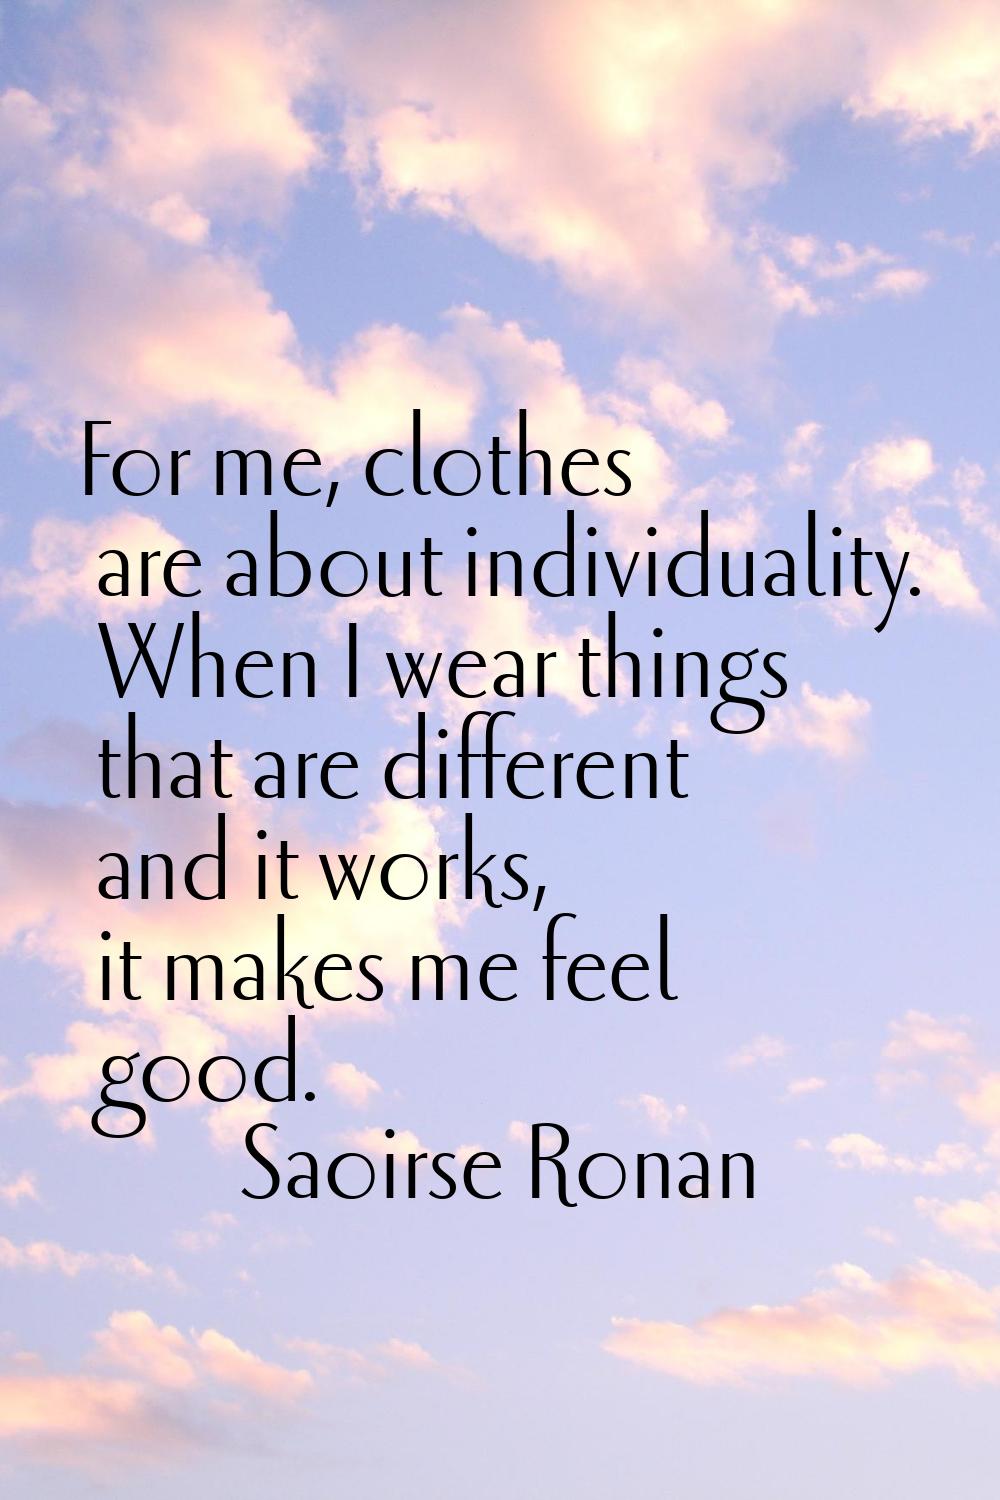 For me, clothes are about individuality. When I wear things that are different and it works, it mak